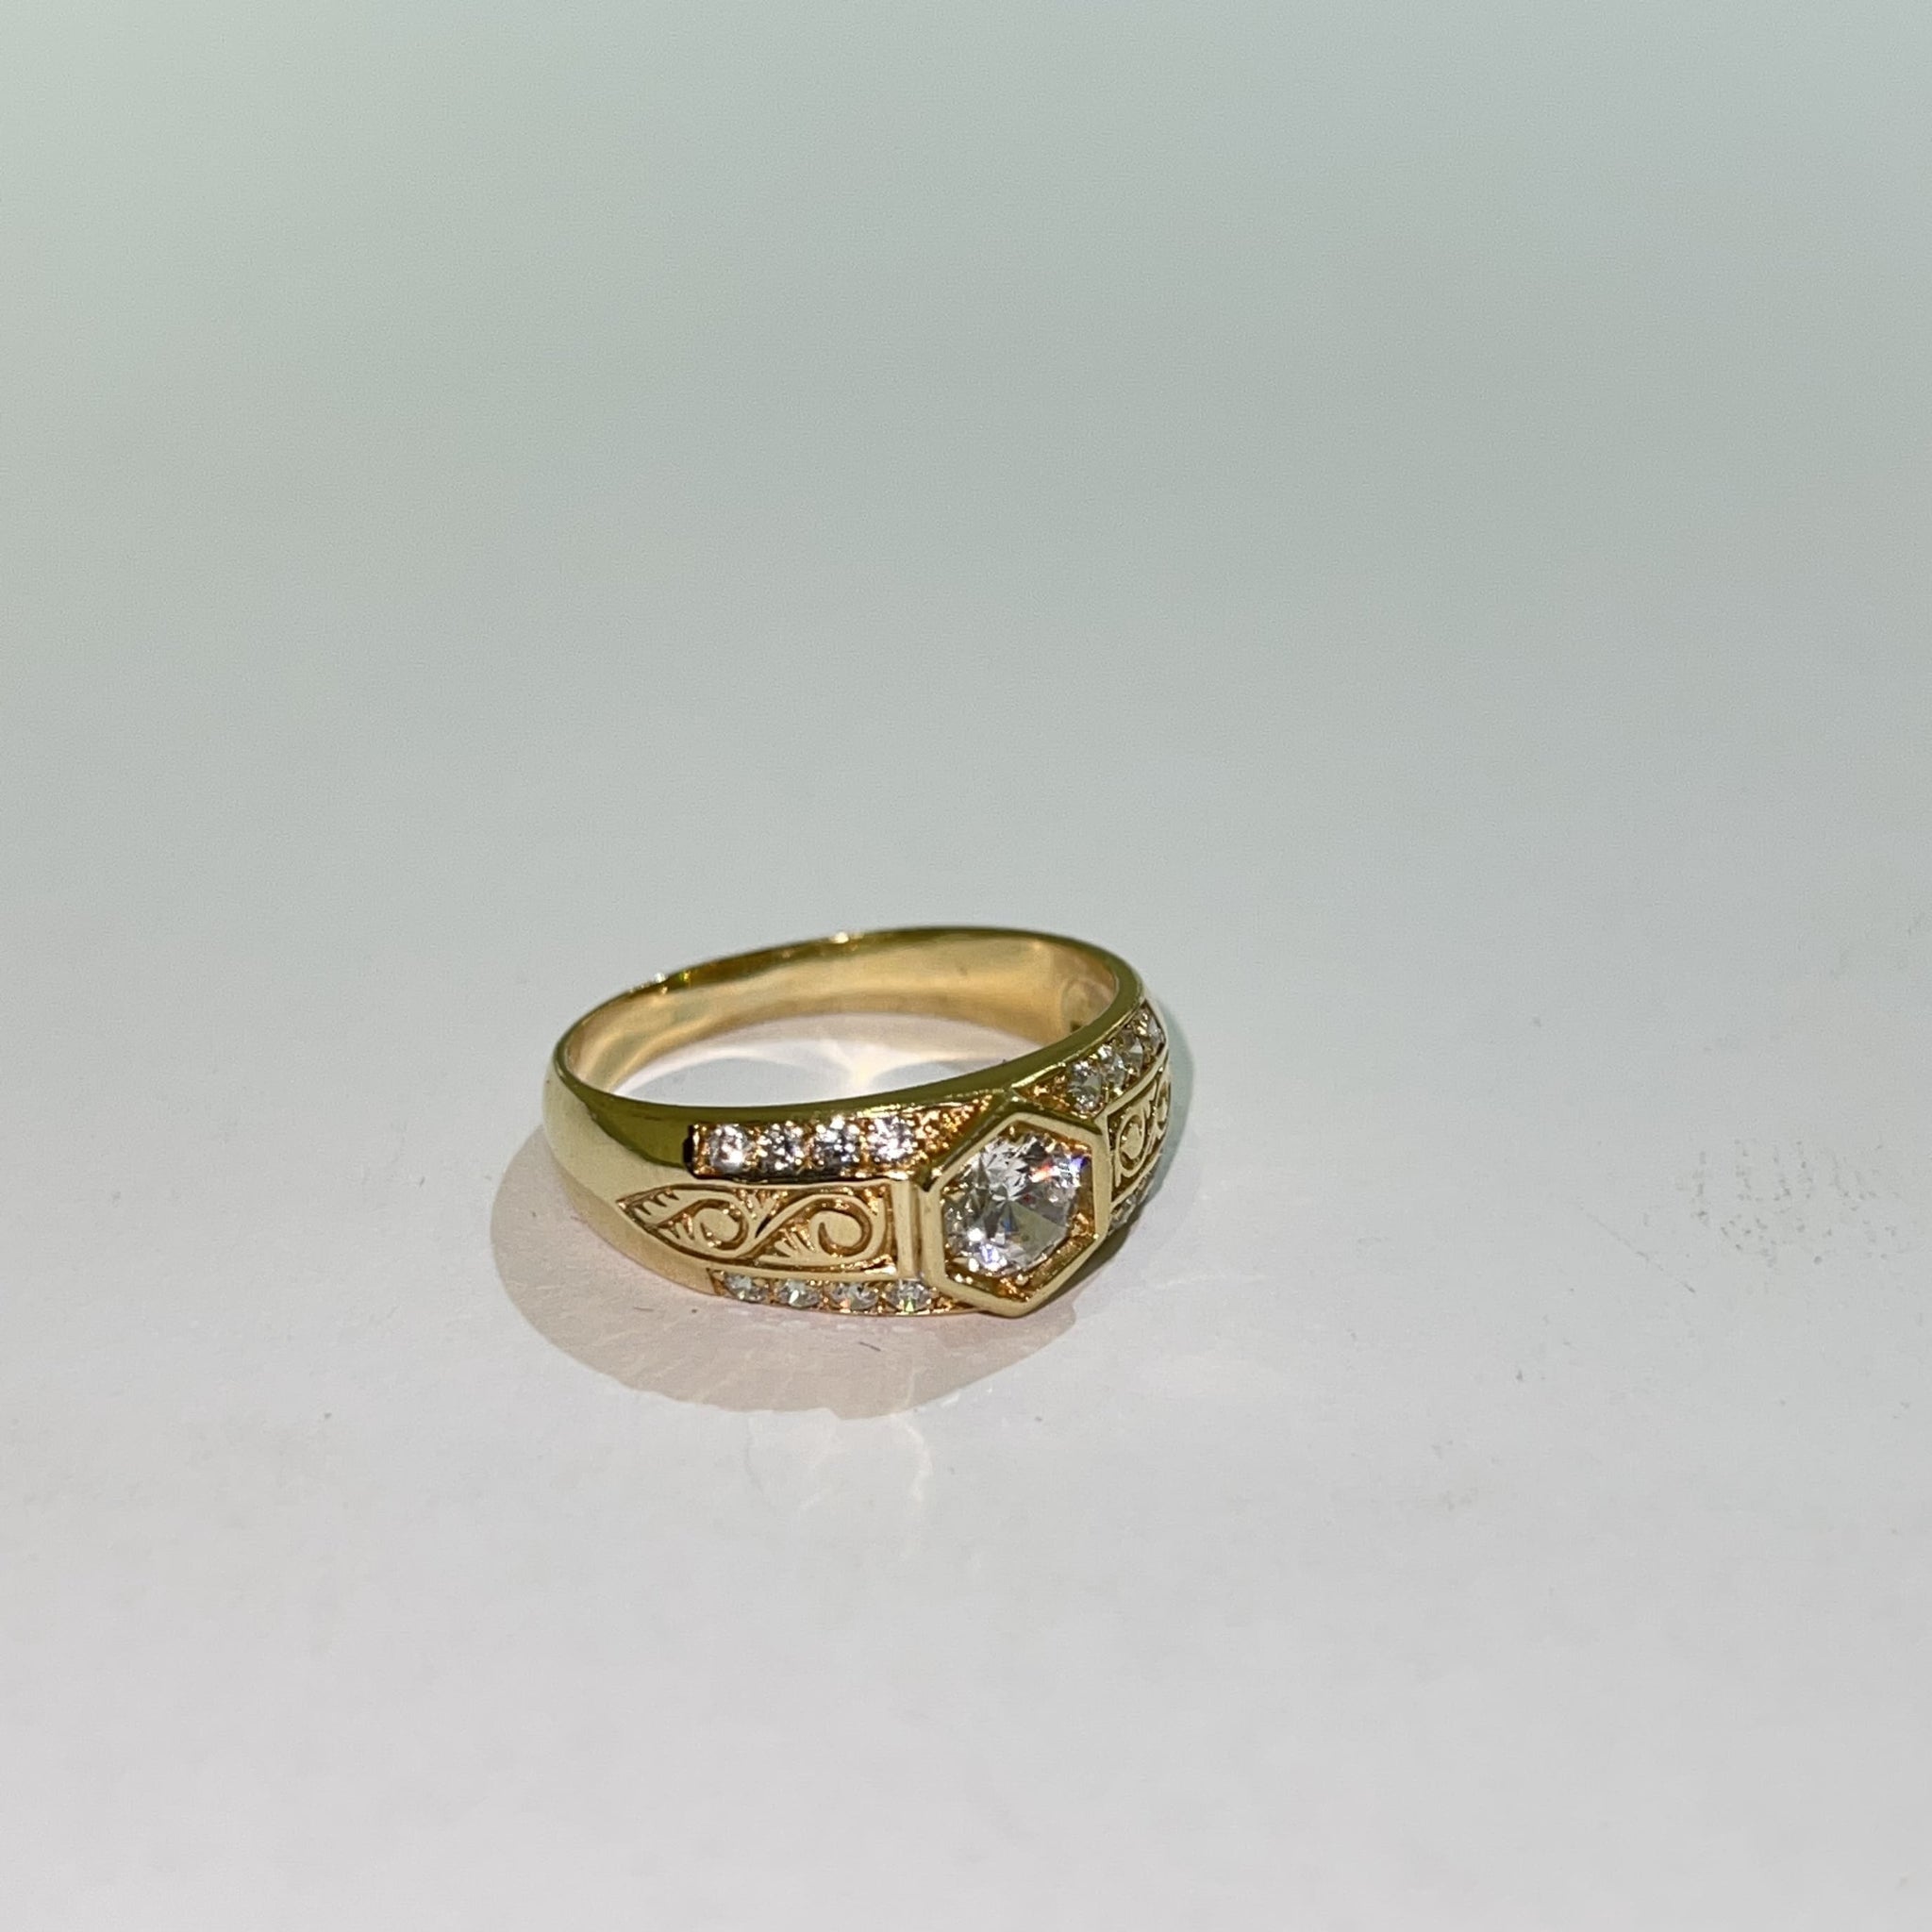 Deluxe Ring - 14 carat gold